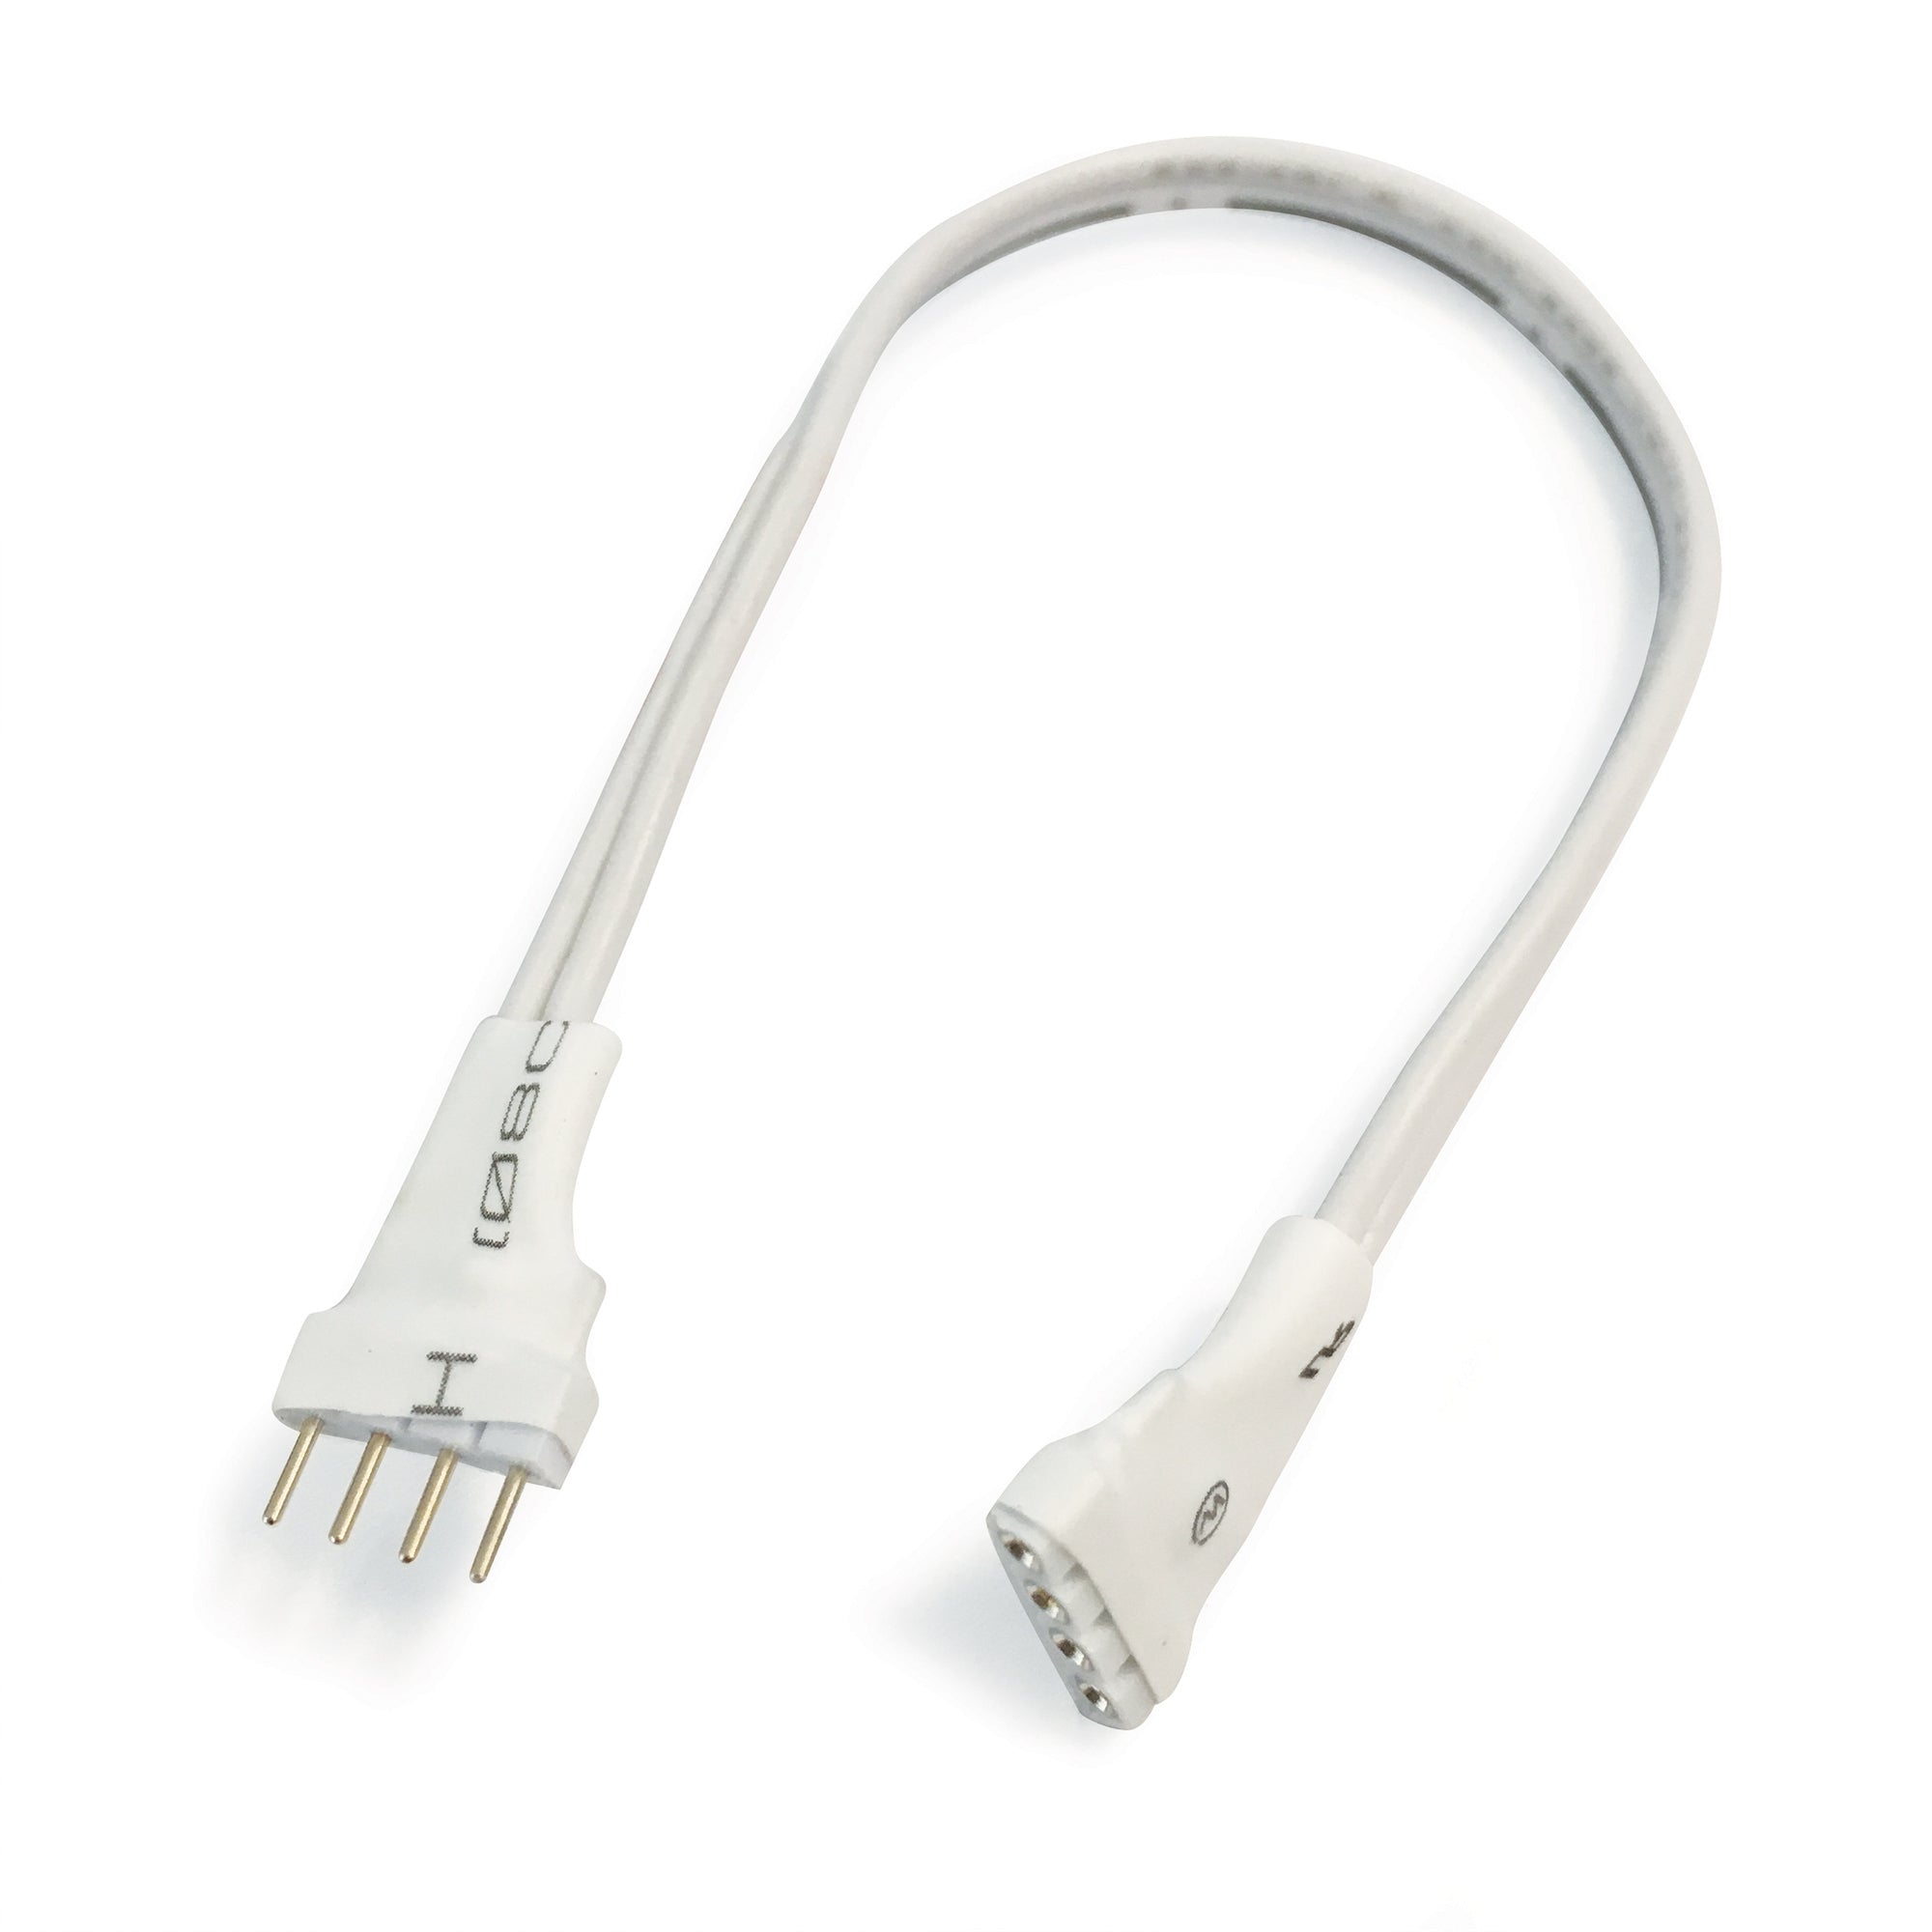 Nora Lighting NARGB-772W - Accent / Undercabinet - 72 Inch Interconnection Cable for 12V or 24V RGB & CCT Tape Light